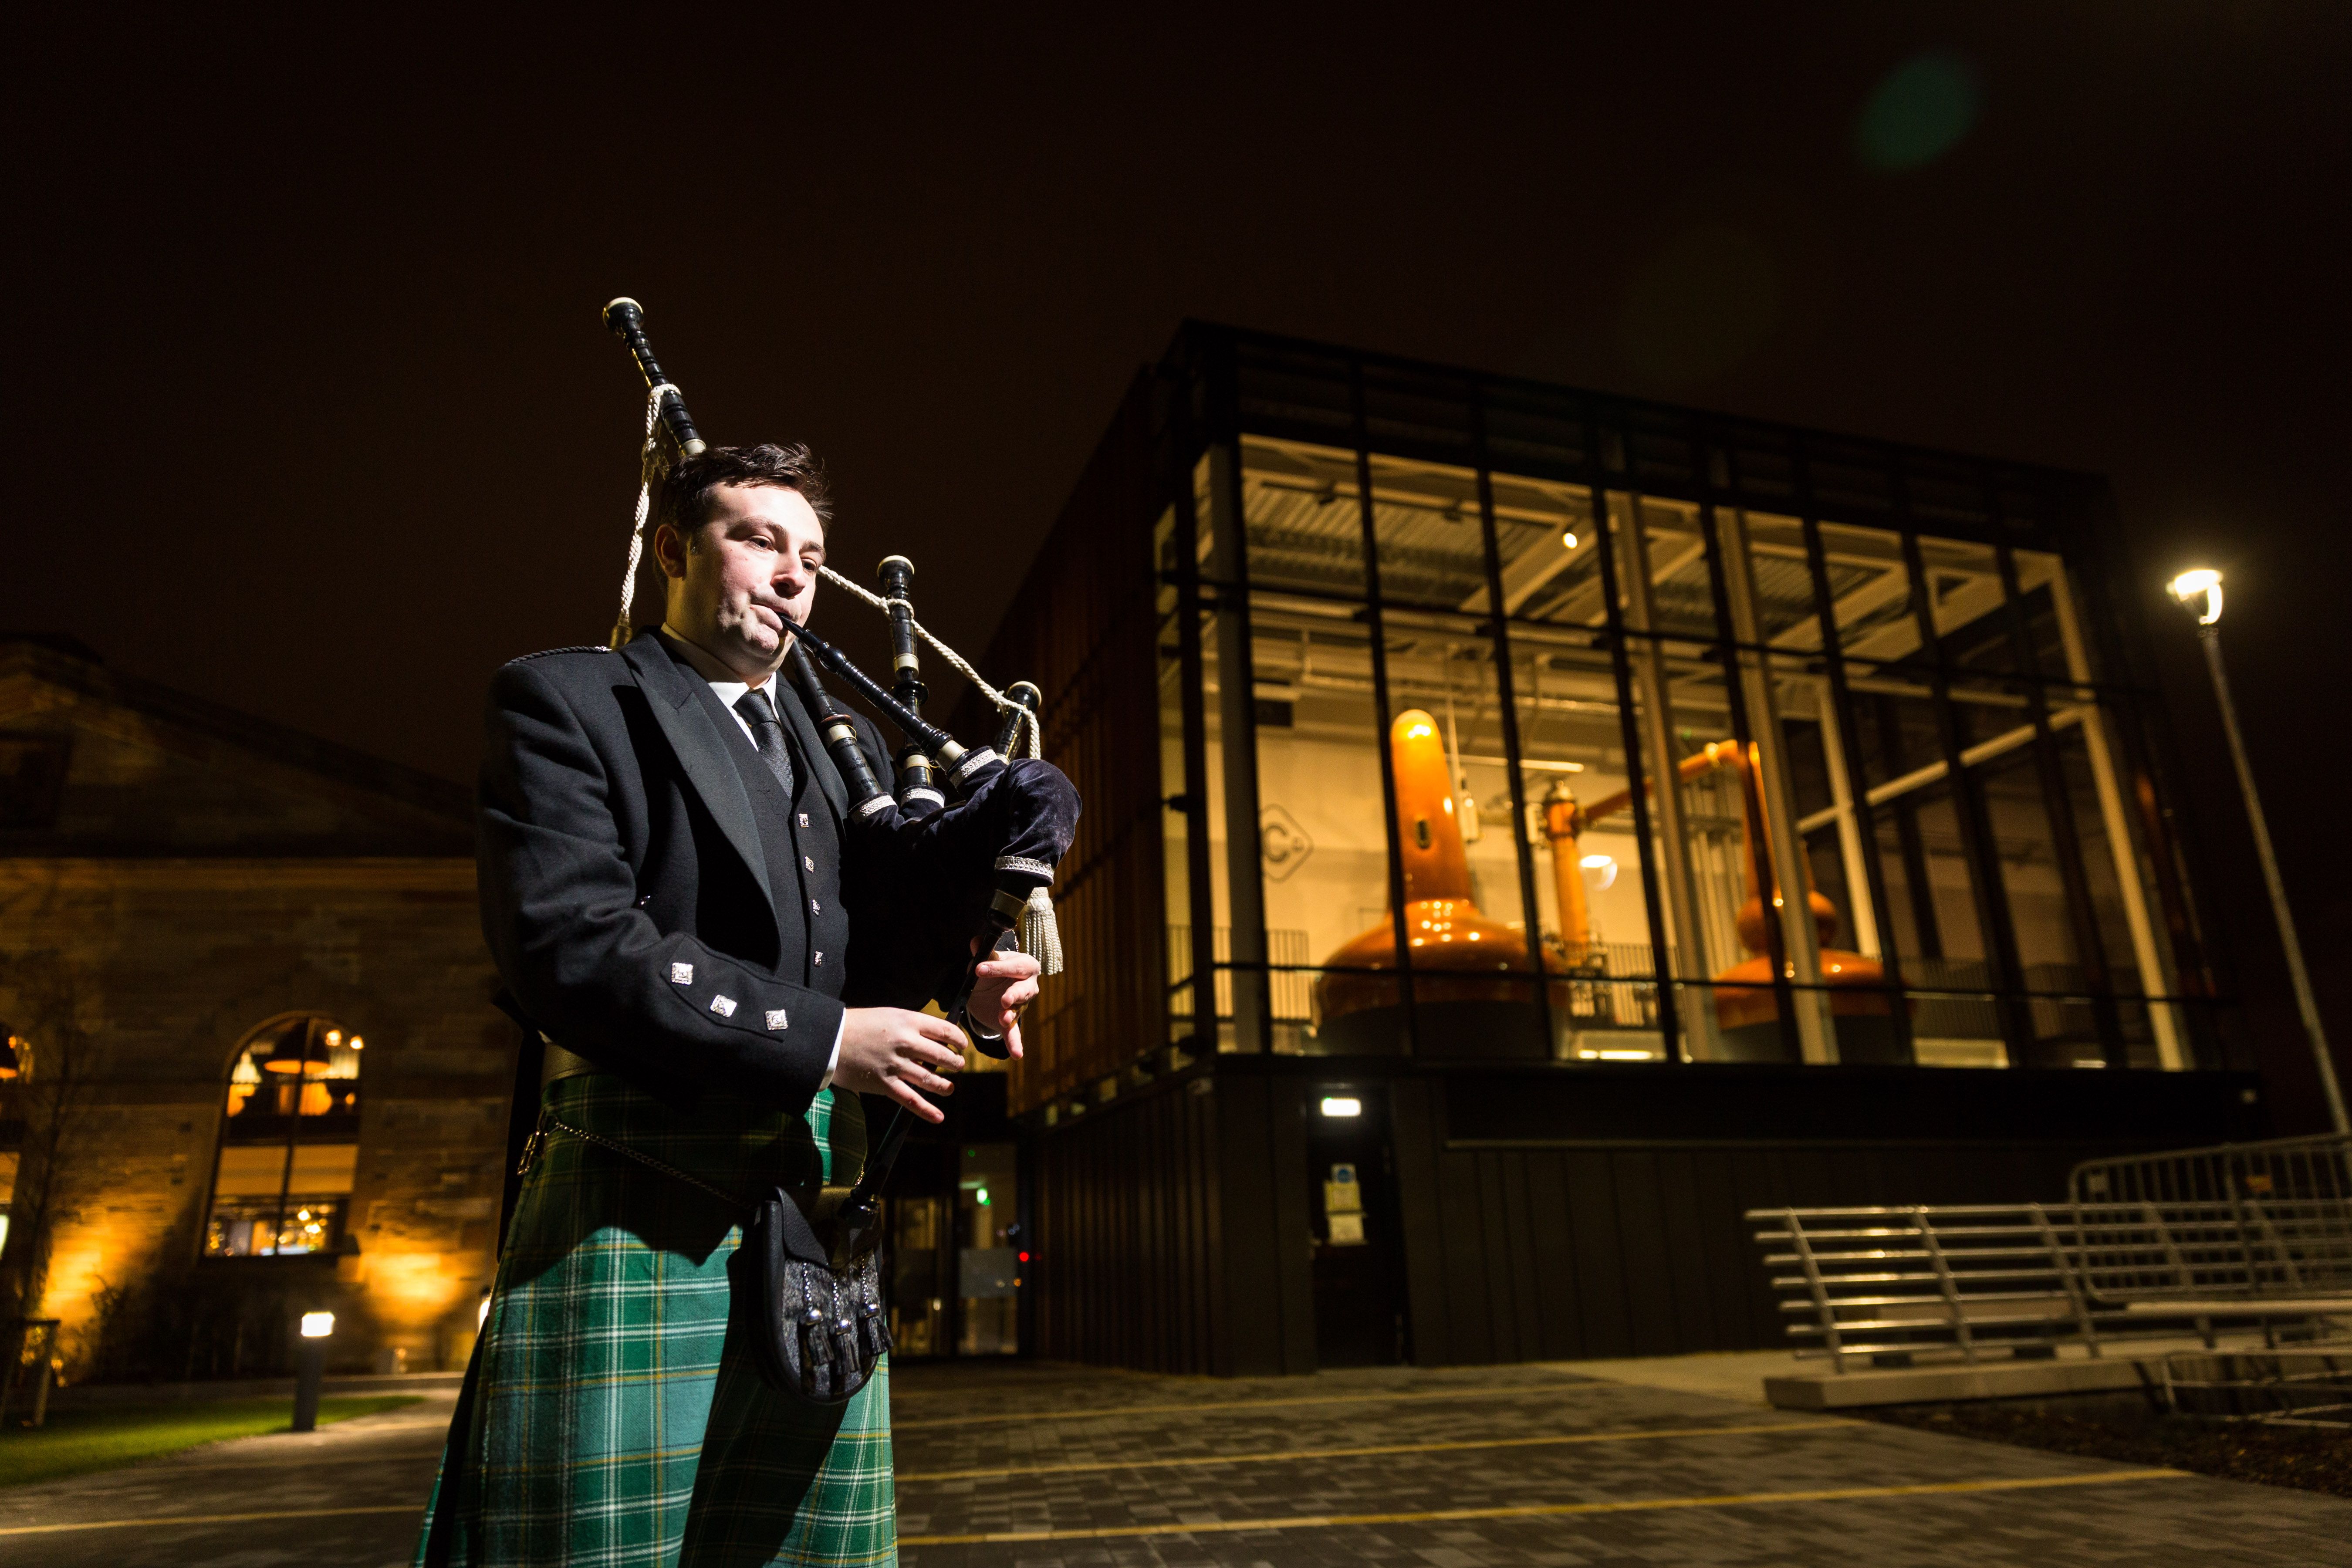 Gentleman playing the bagpipes